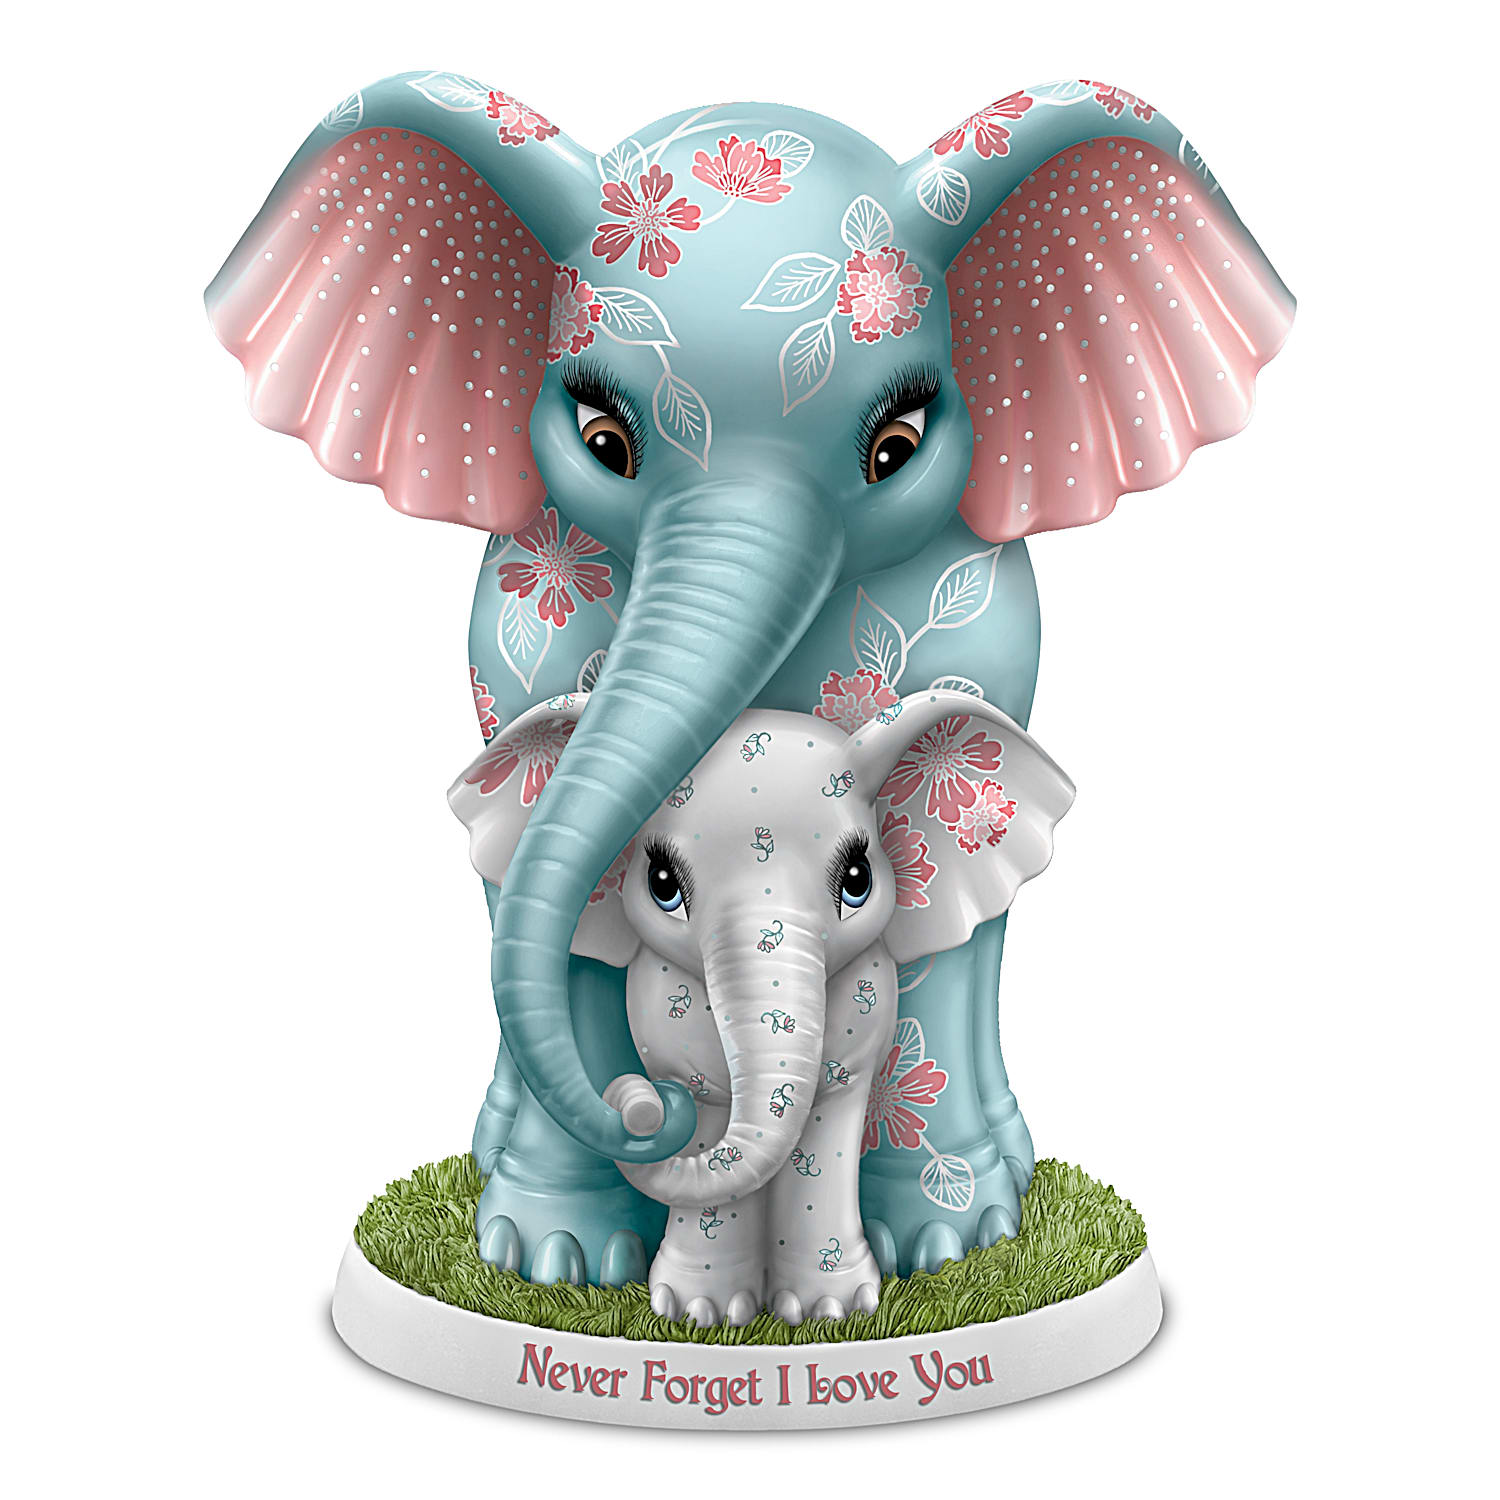 Never Forget I Love You Hand-Painted Elephant Figurine Featuring A Unique  Floral Pattern By Artist Blake Jensen